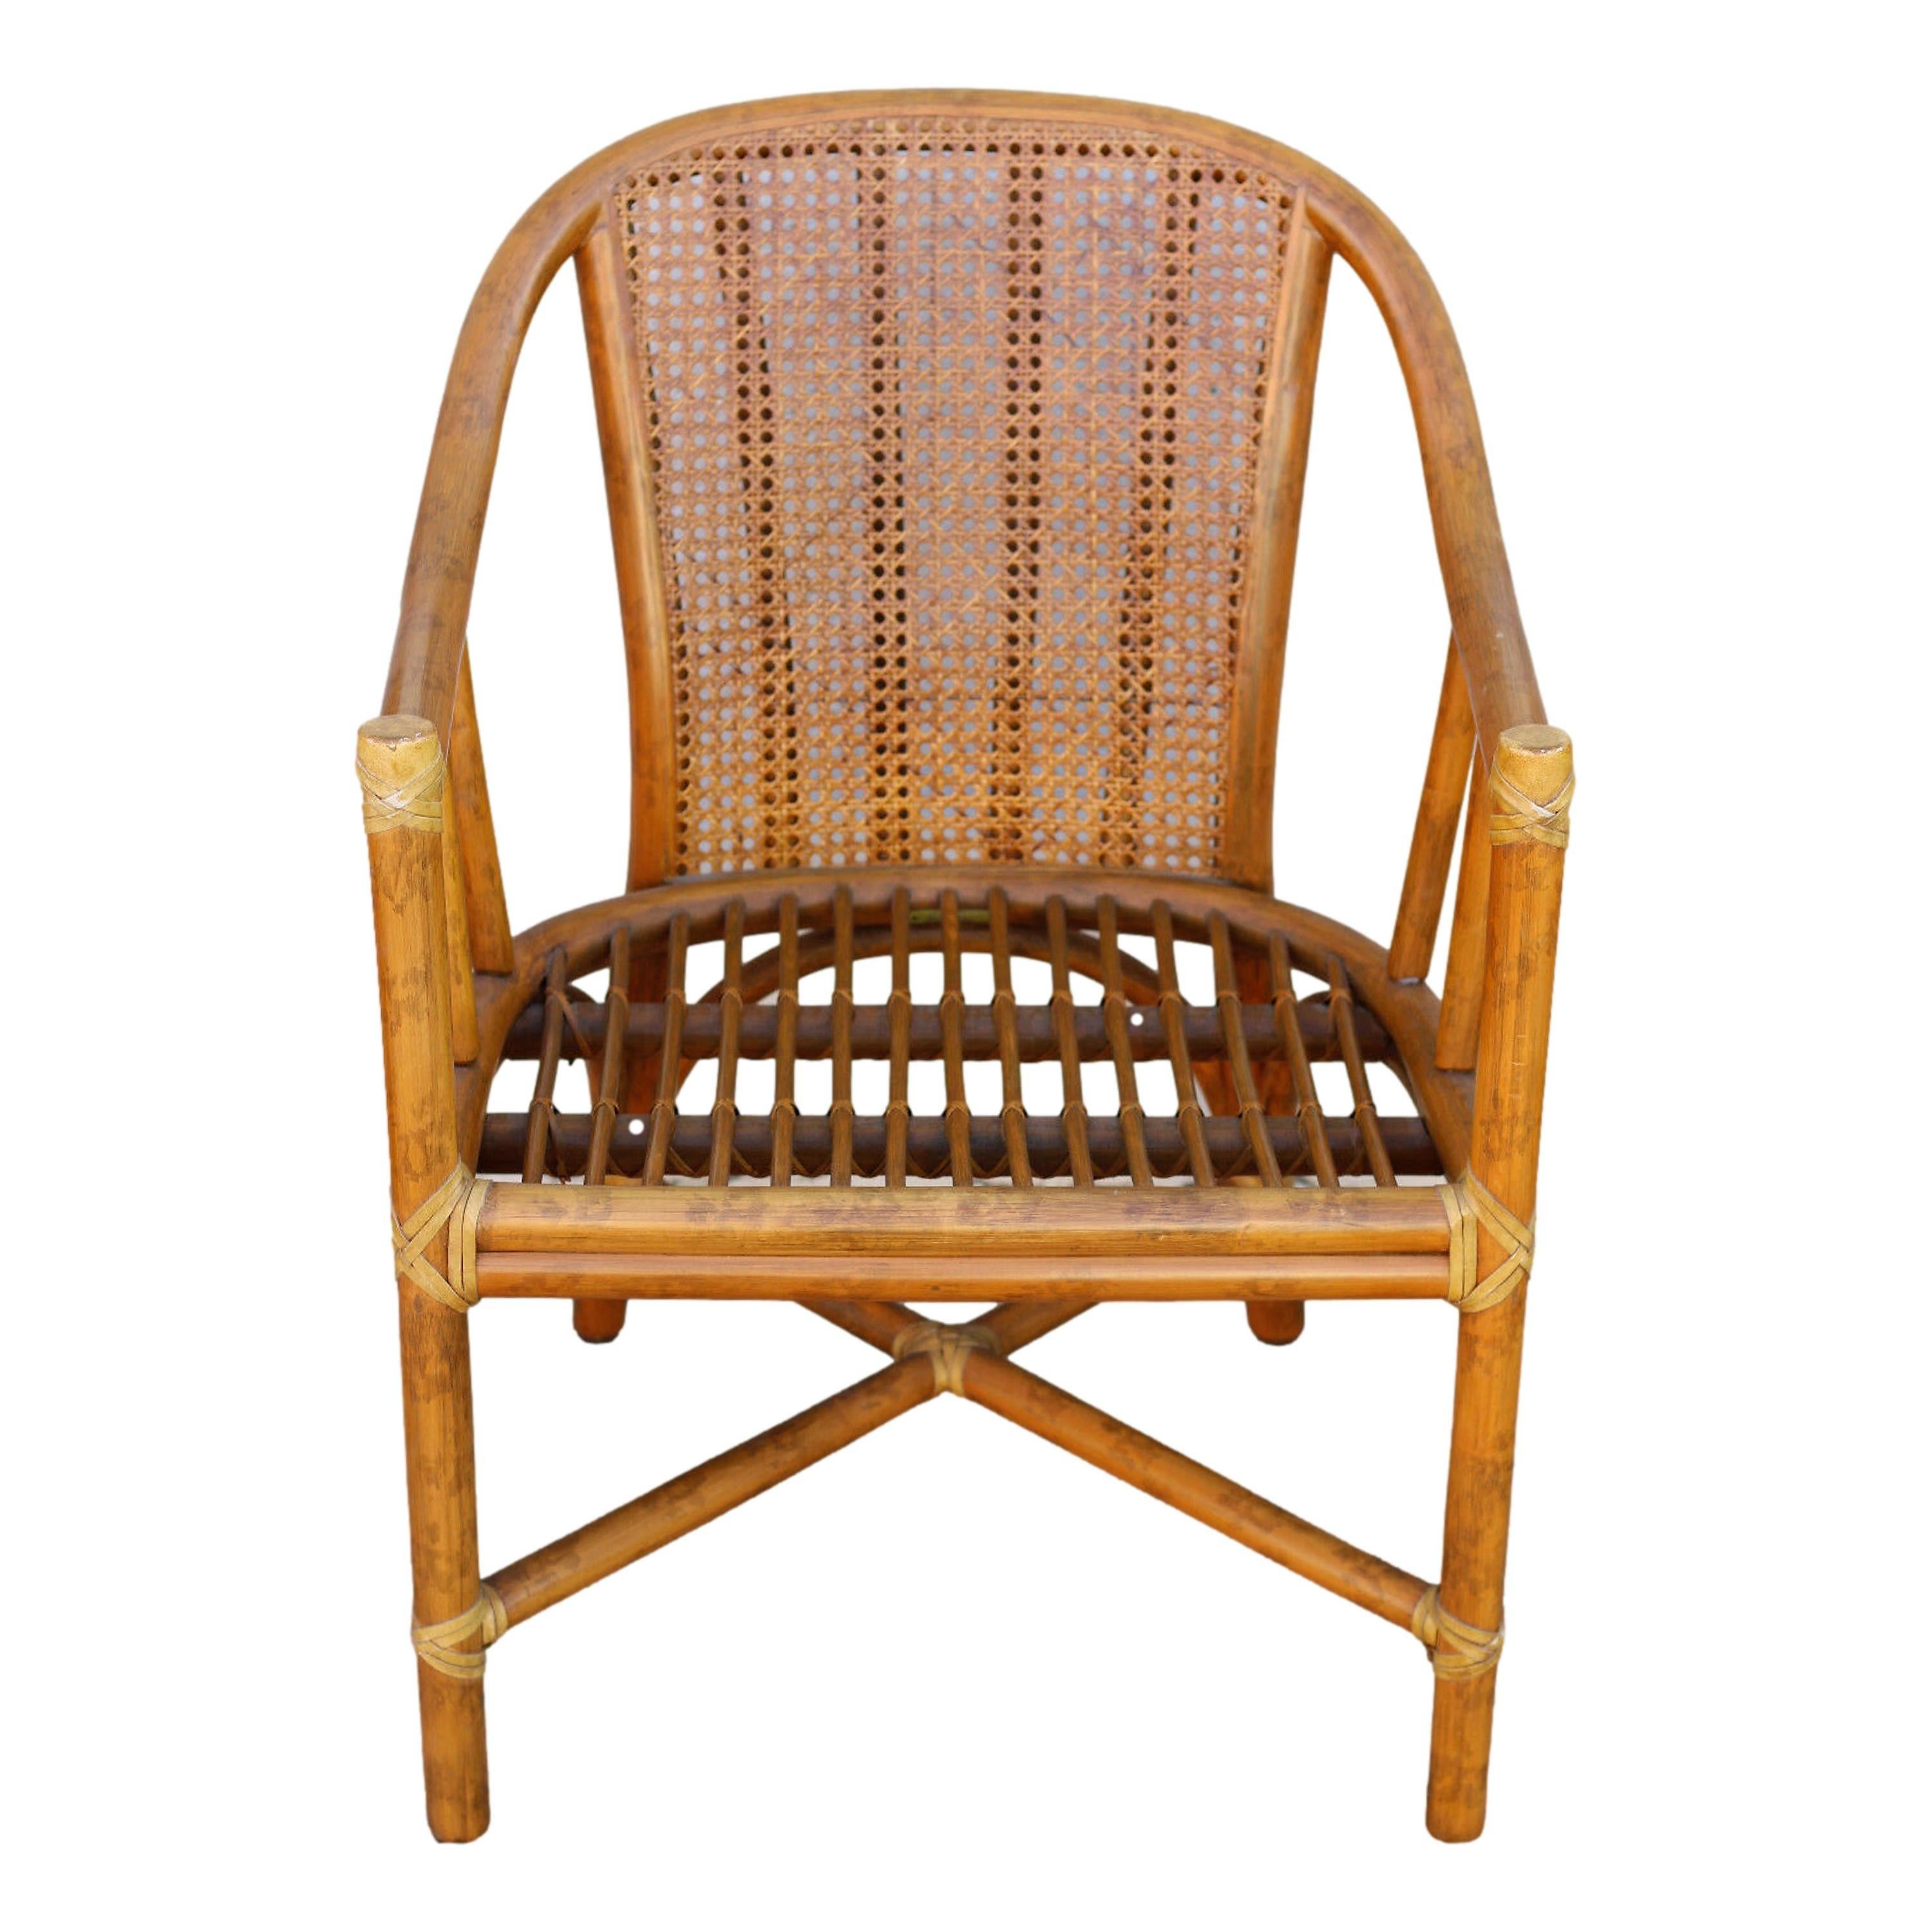 Casual luxury from McGuire San Francisco. This vintage organic modern set of four armchairs features a cane seat back and graceful frames constructed from bent rattan with curved arms and seat. Vintage seat cushions rest on a stick deck, and legs